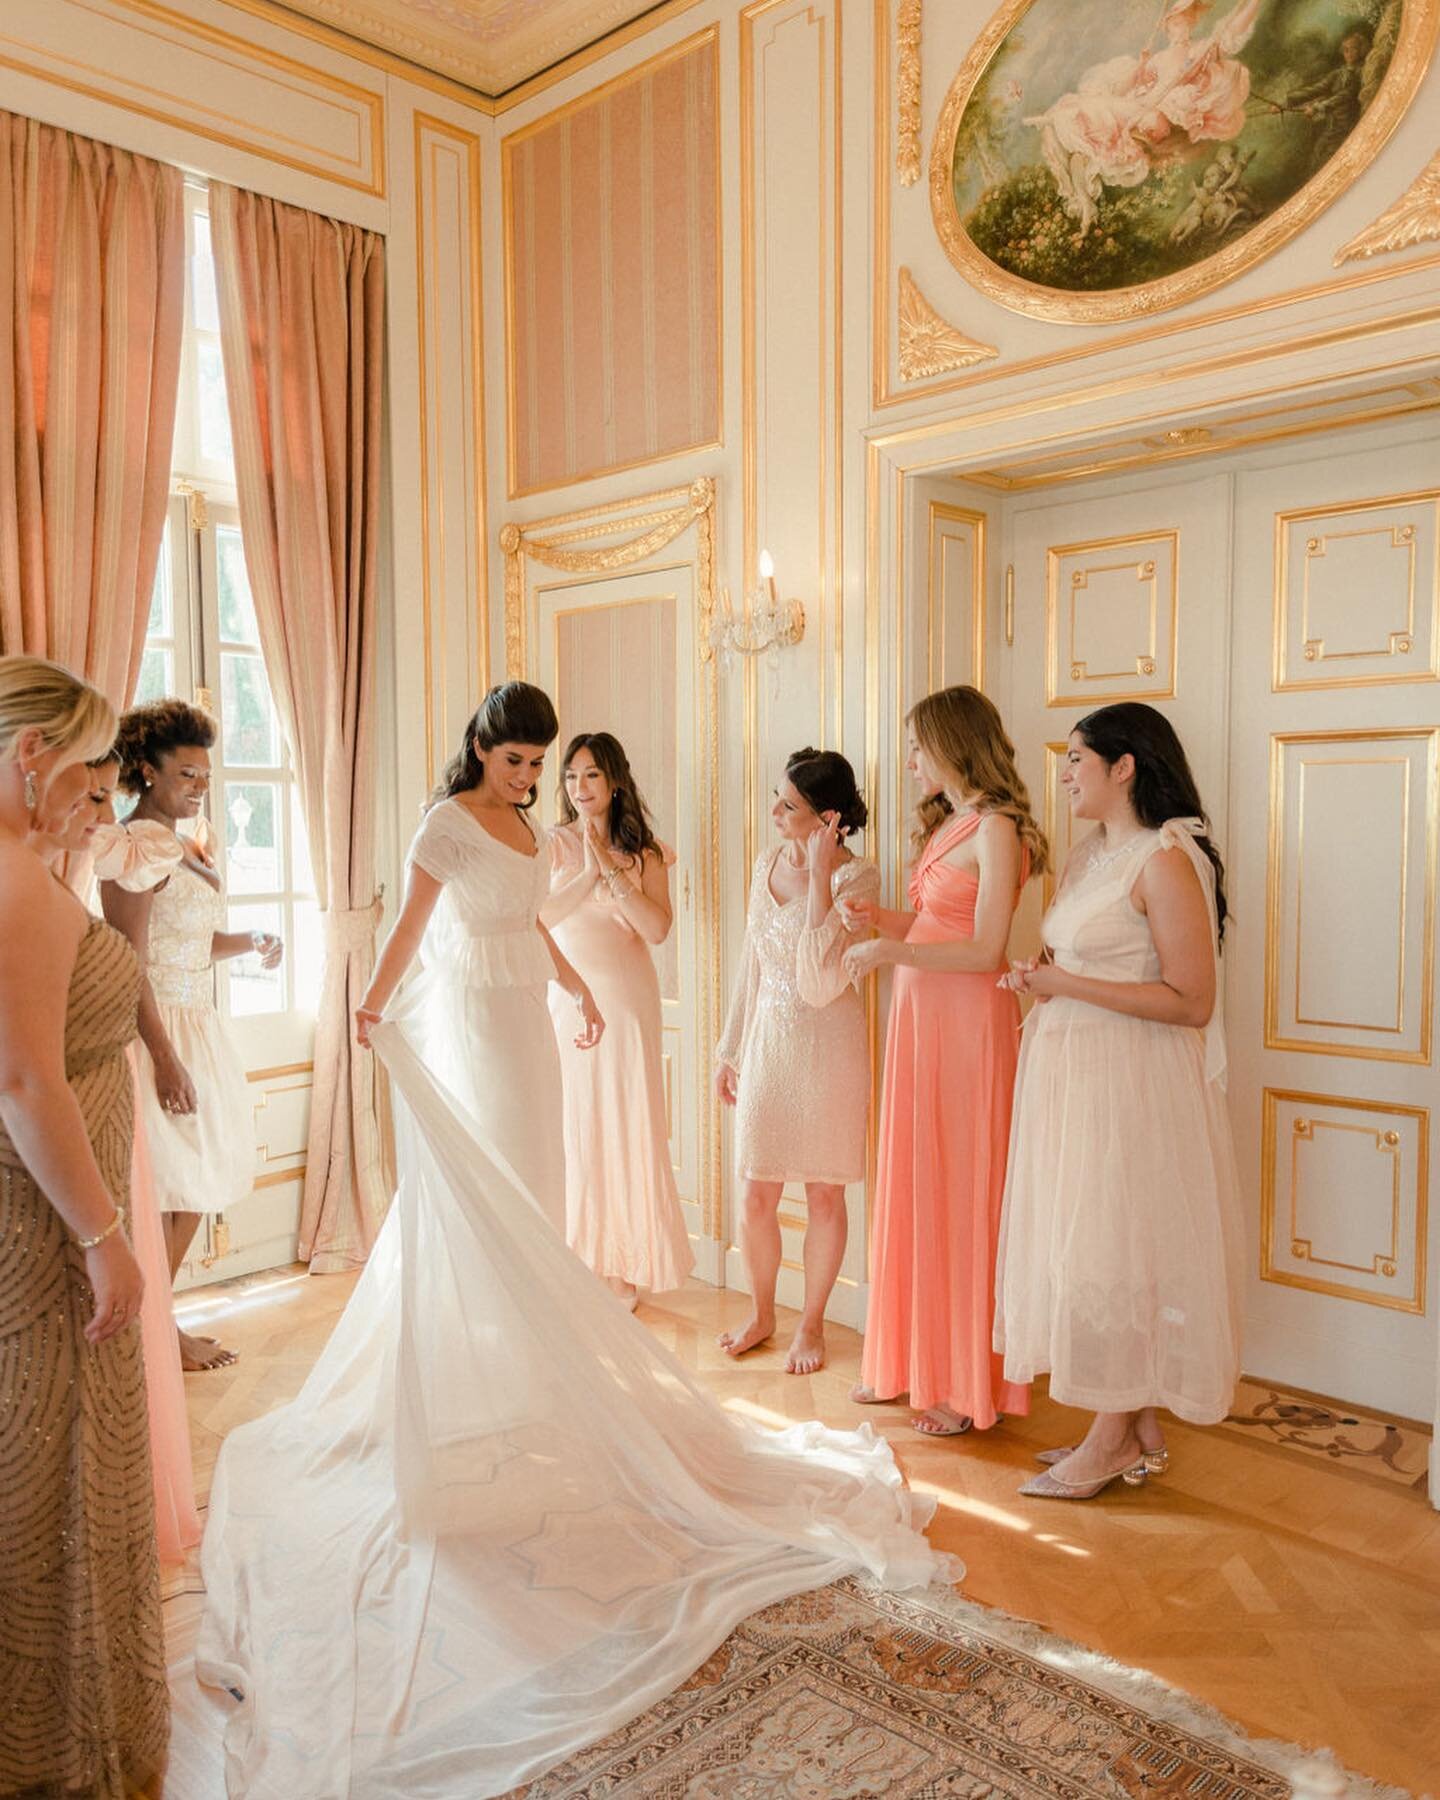 Have you ever considered designing your own wedding dress? This option is perfect for the creative bride who is struggling to find a gown that perfectly matches the vision she has in her head, or the bride who has visited several bridal salons and st